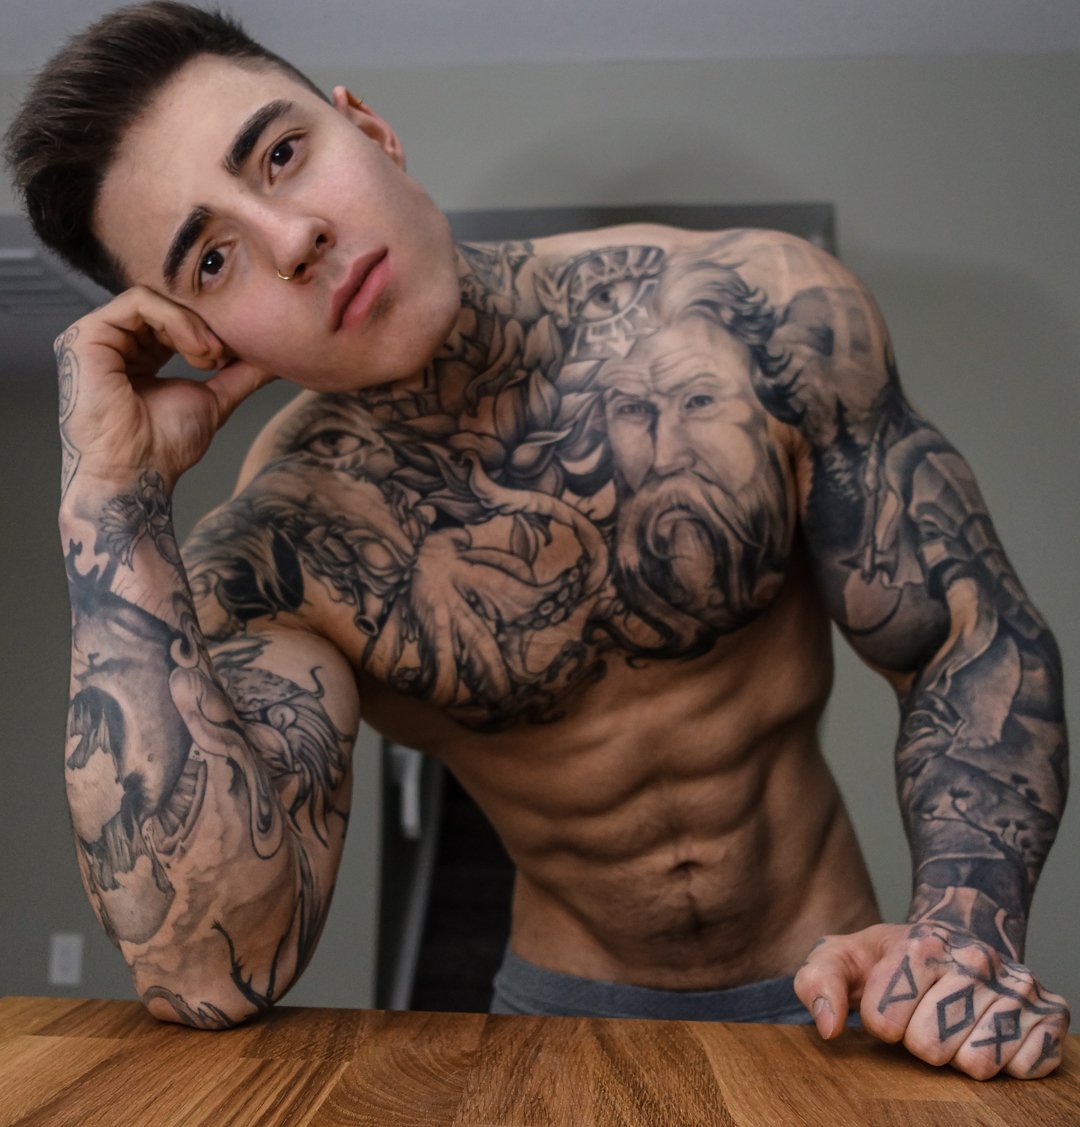 What am I thinking about? http://Onlyfans.com/Jakipz.